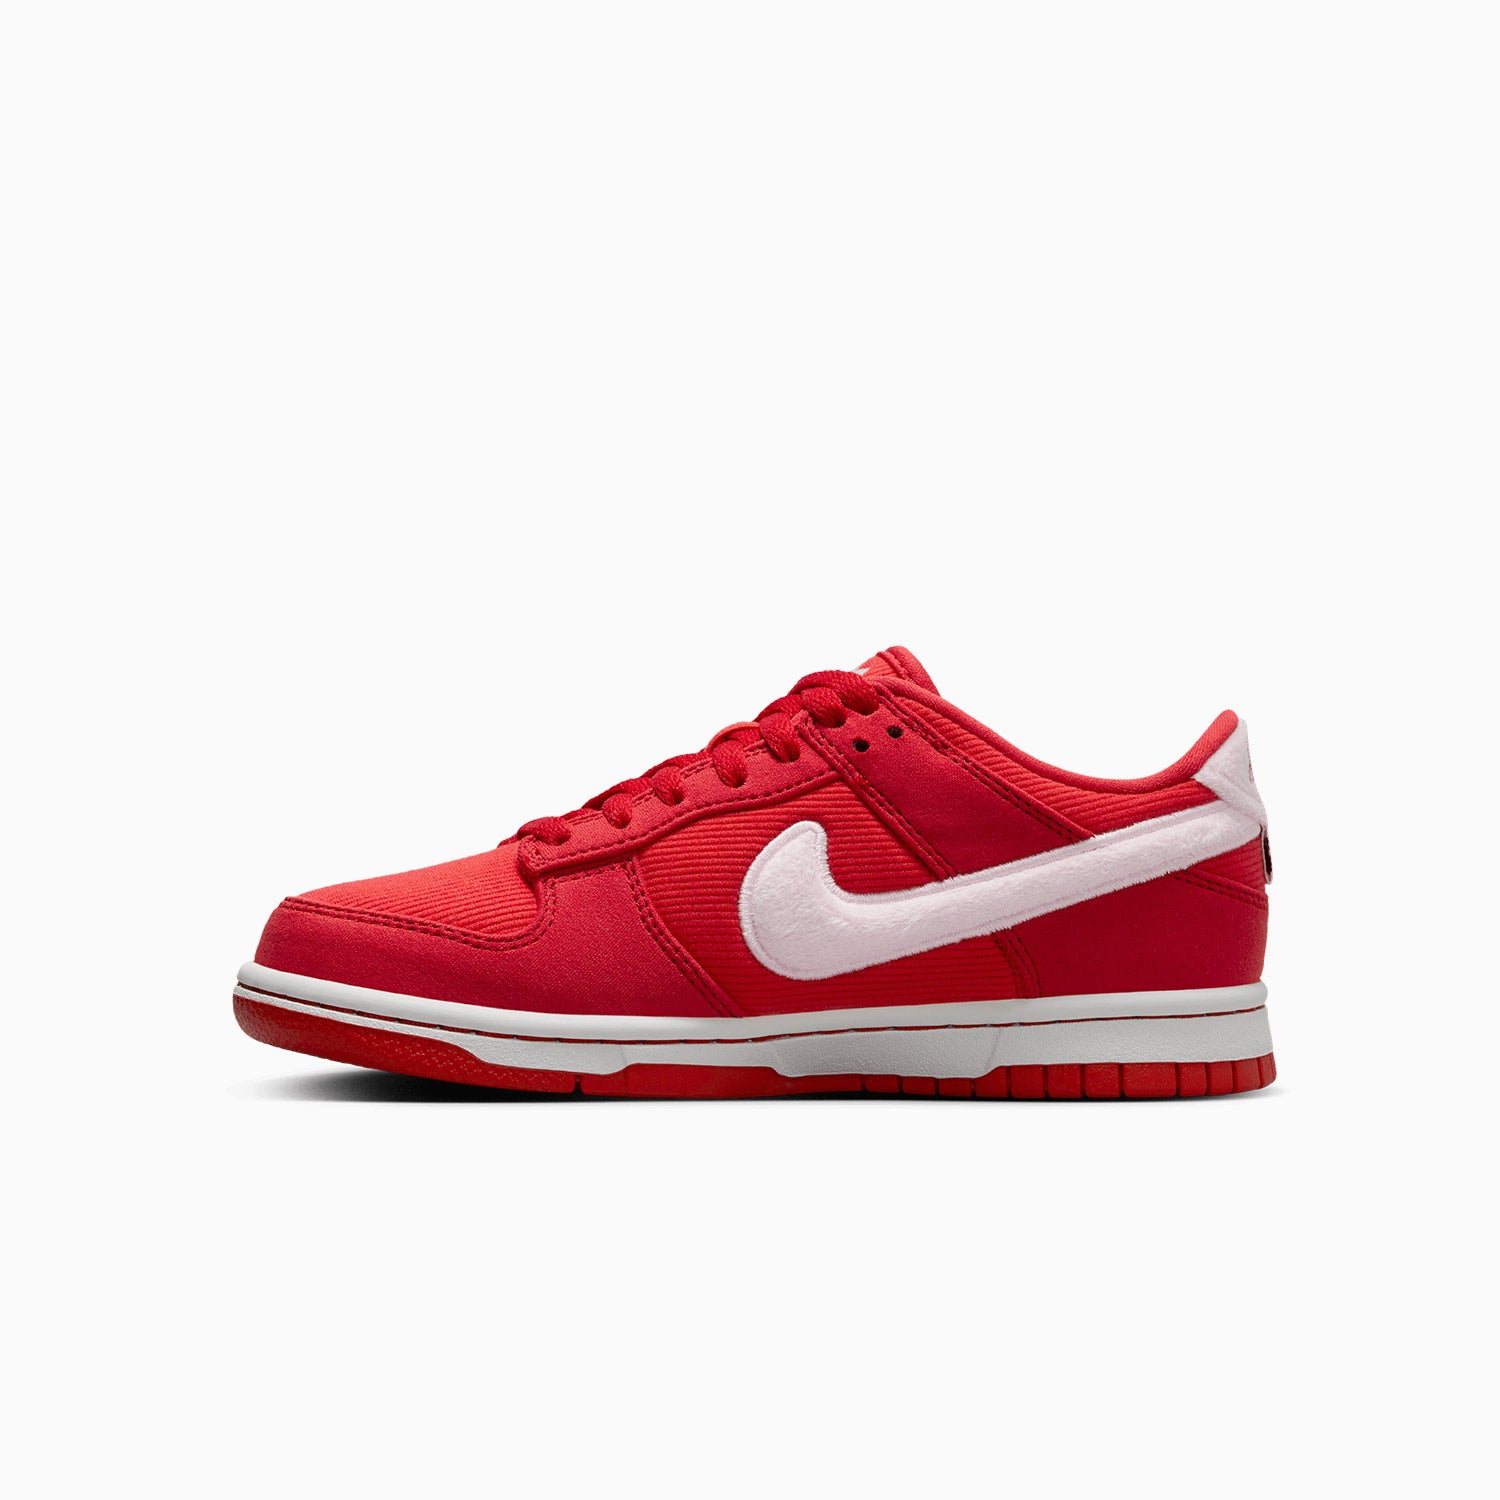 nike-kids-dunk-low-valentines-day-grade-school-shoes-fz3548-612